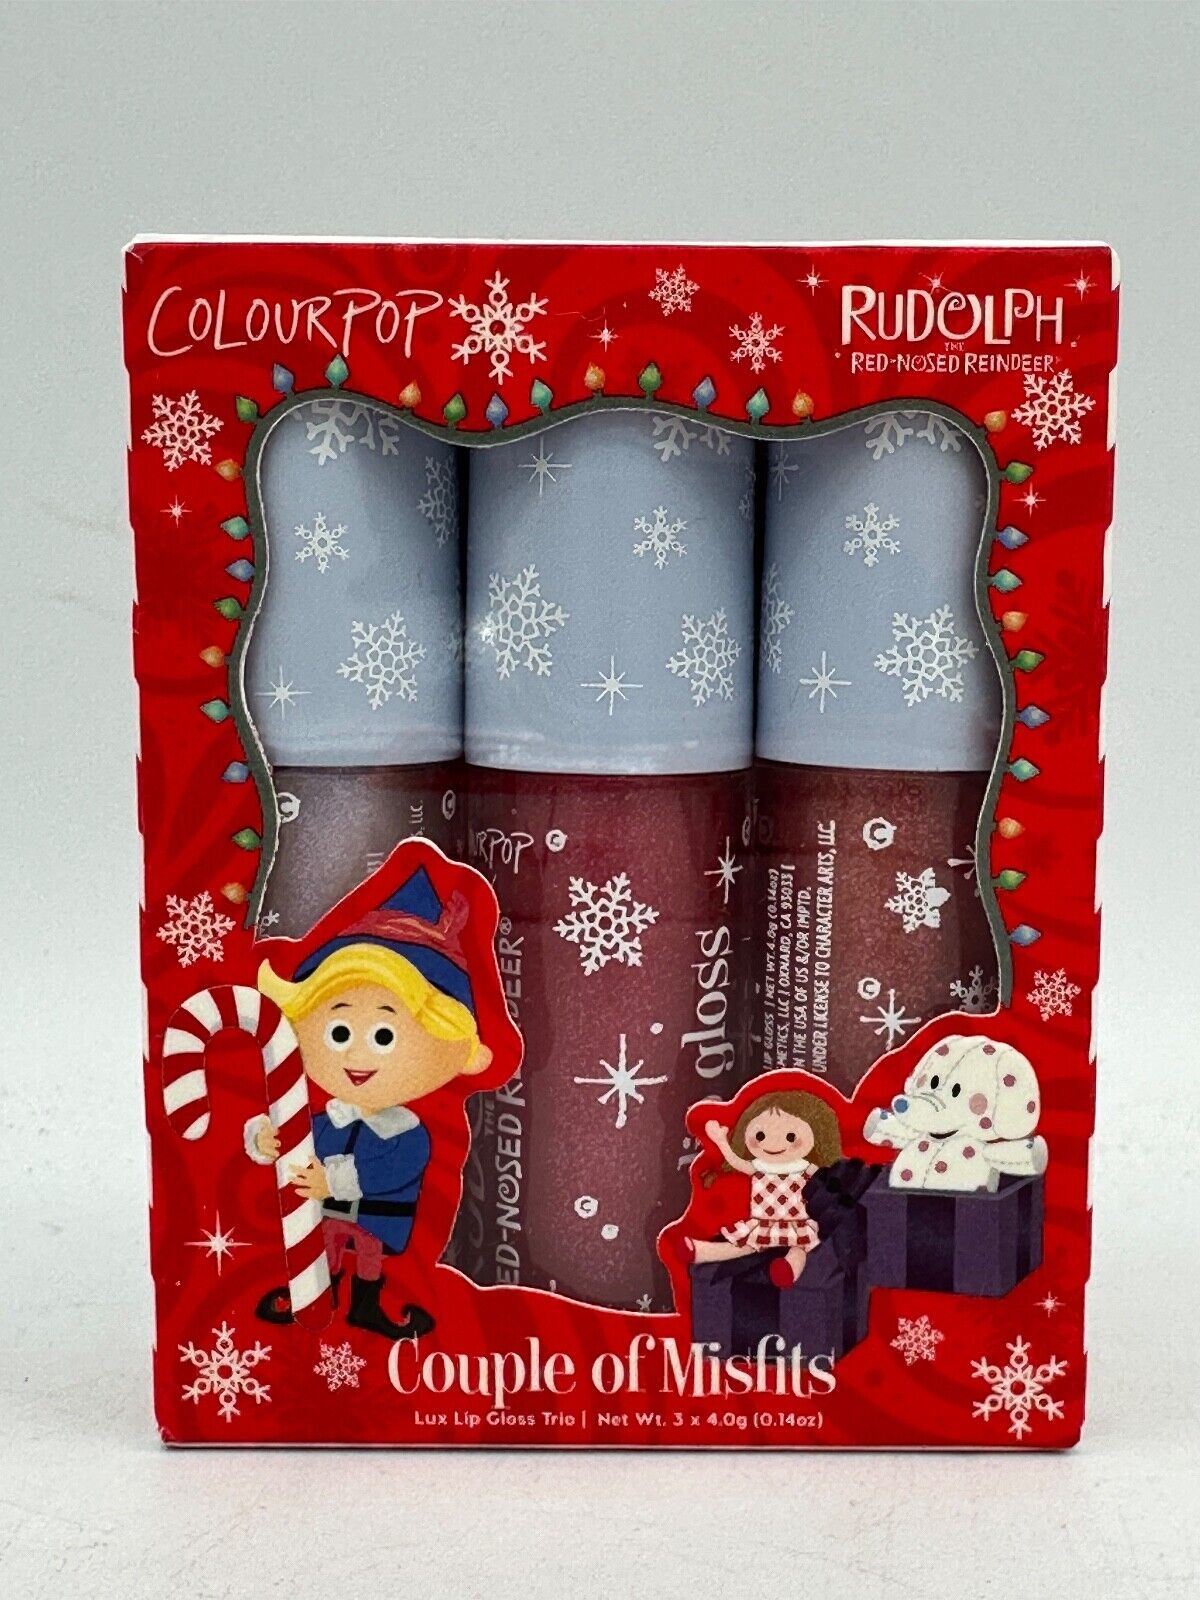 Colourpop Rudolph The Red Nose Red Nose Reindeer Lux Gloss Trio Couple Of Misfit - $33.85